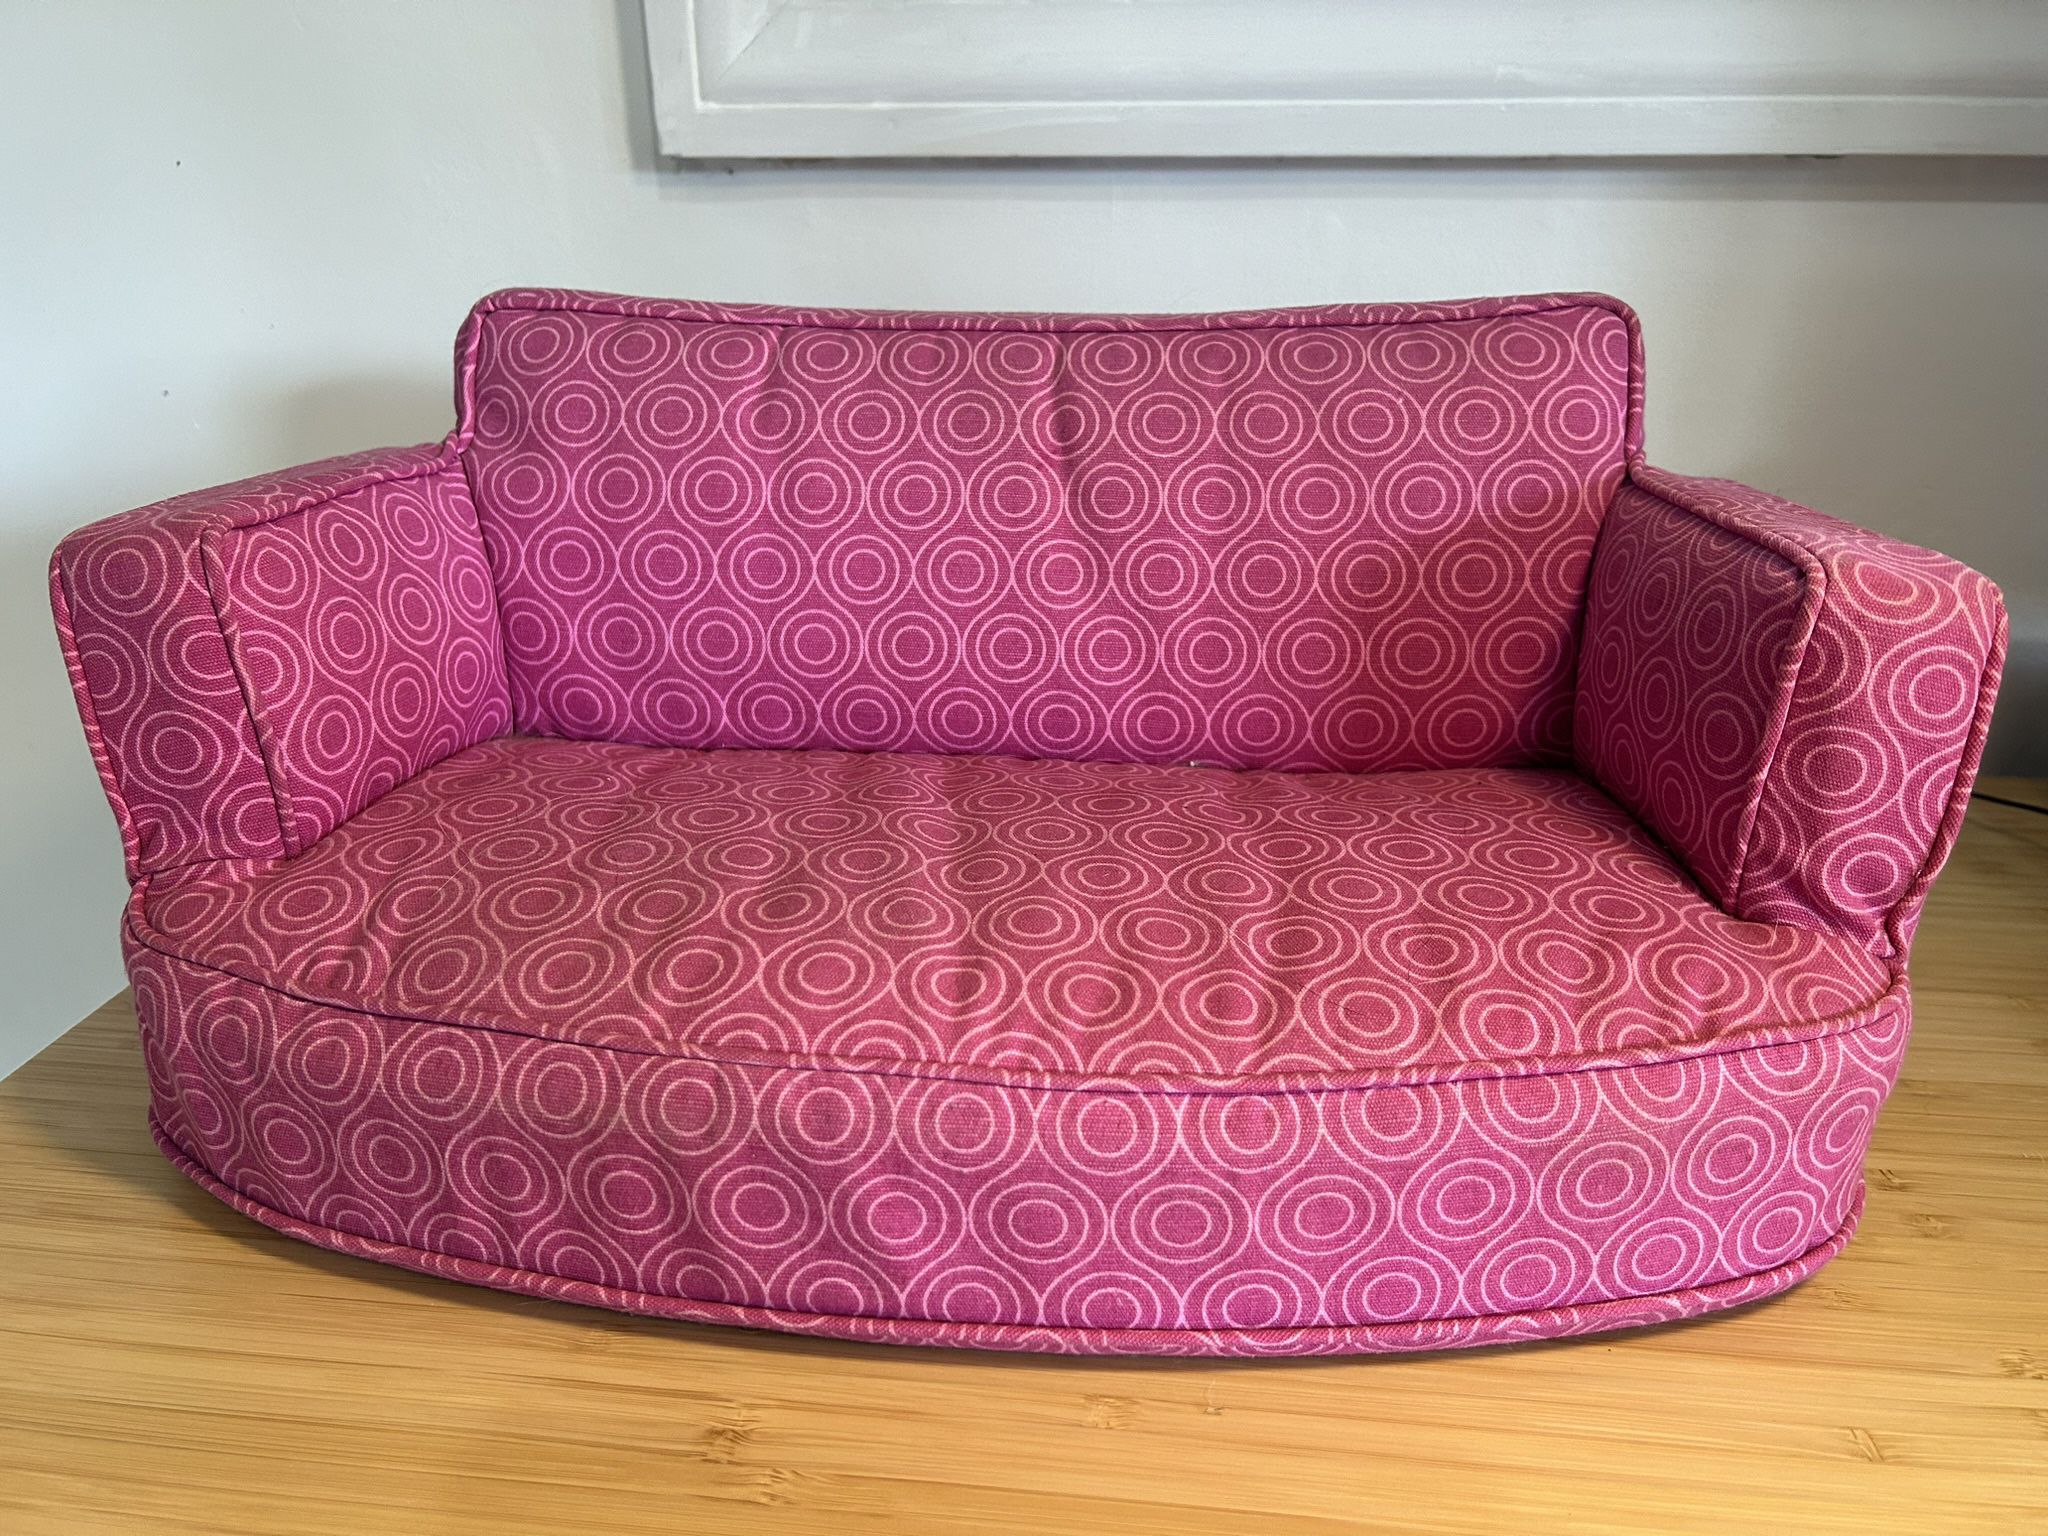 American girl, doll couch 